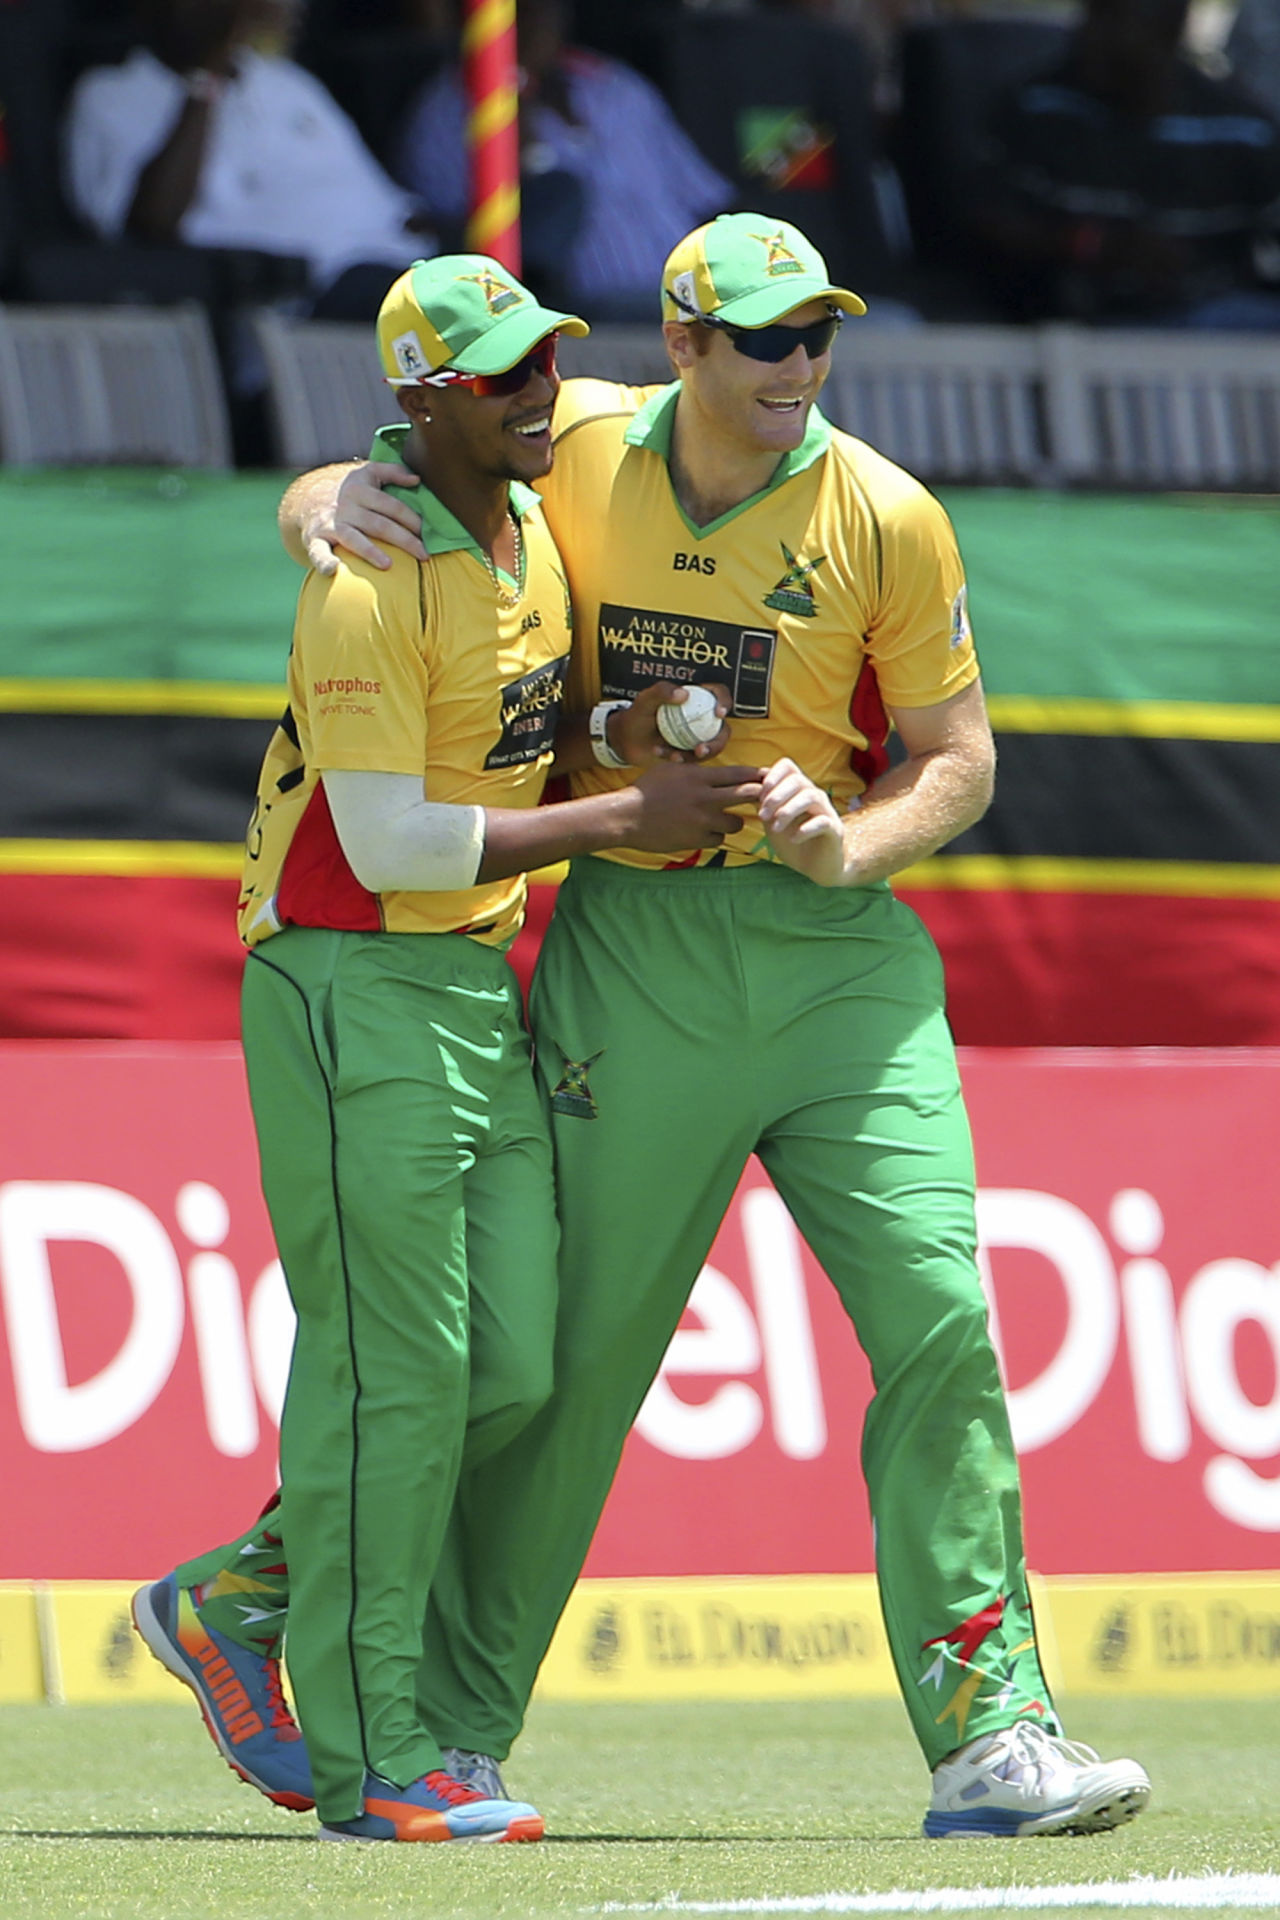 Martin Guptill celebrates his one-handed catch with Lendl Simmons, Guyana Amazon Warriors v St Lucia Zouks, CPL 2014, St Kitts, August 10, 2014